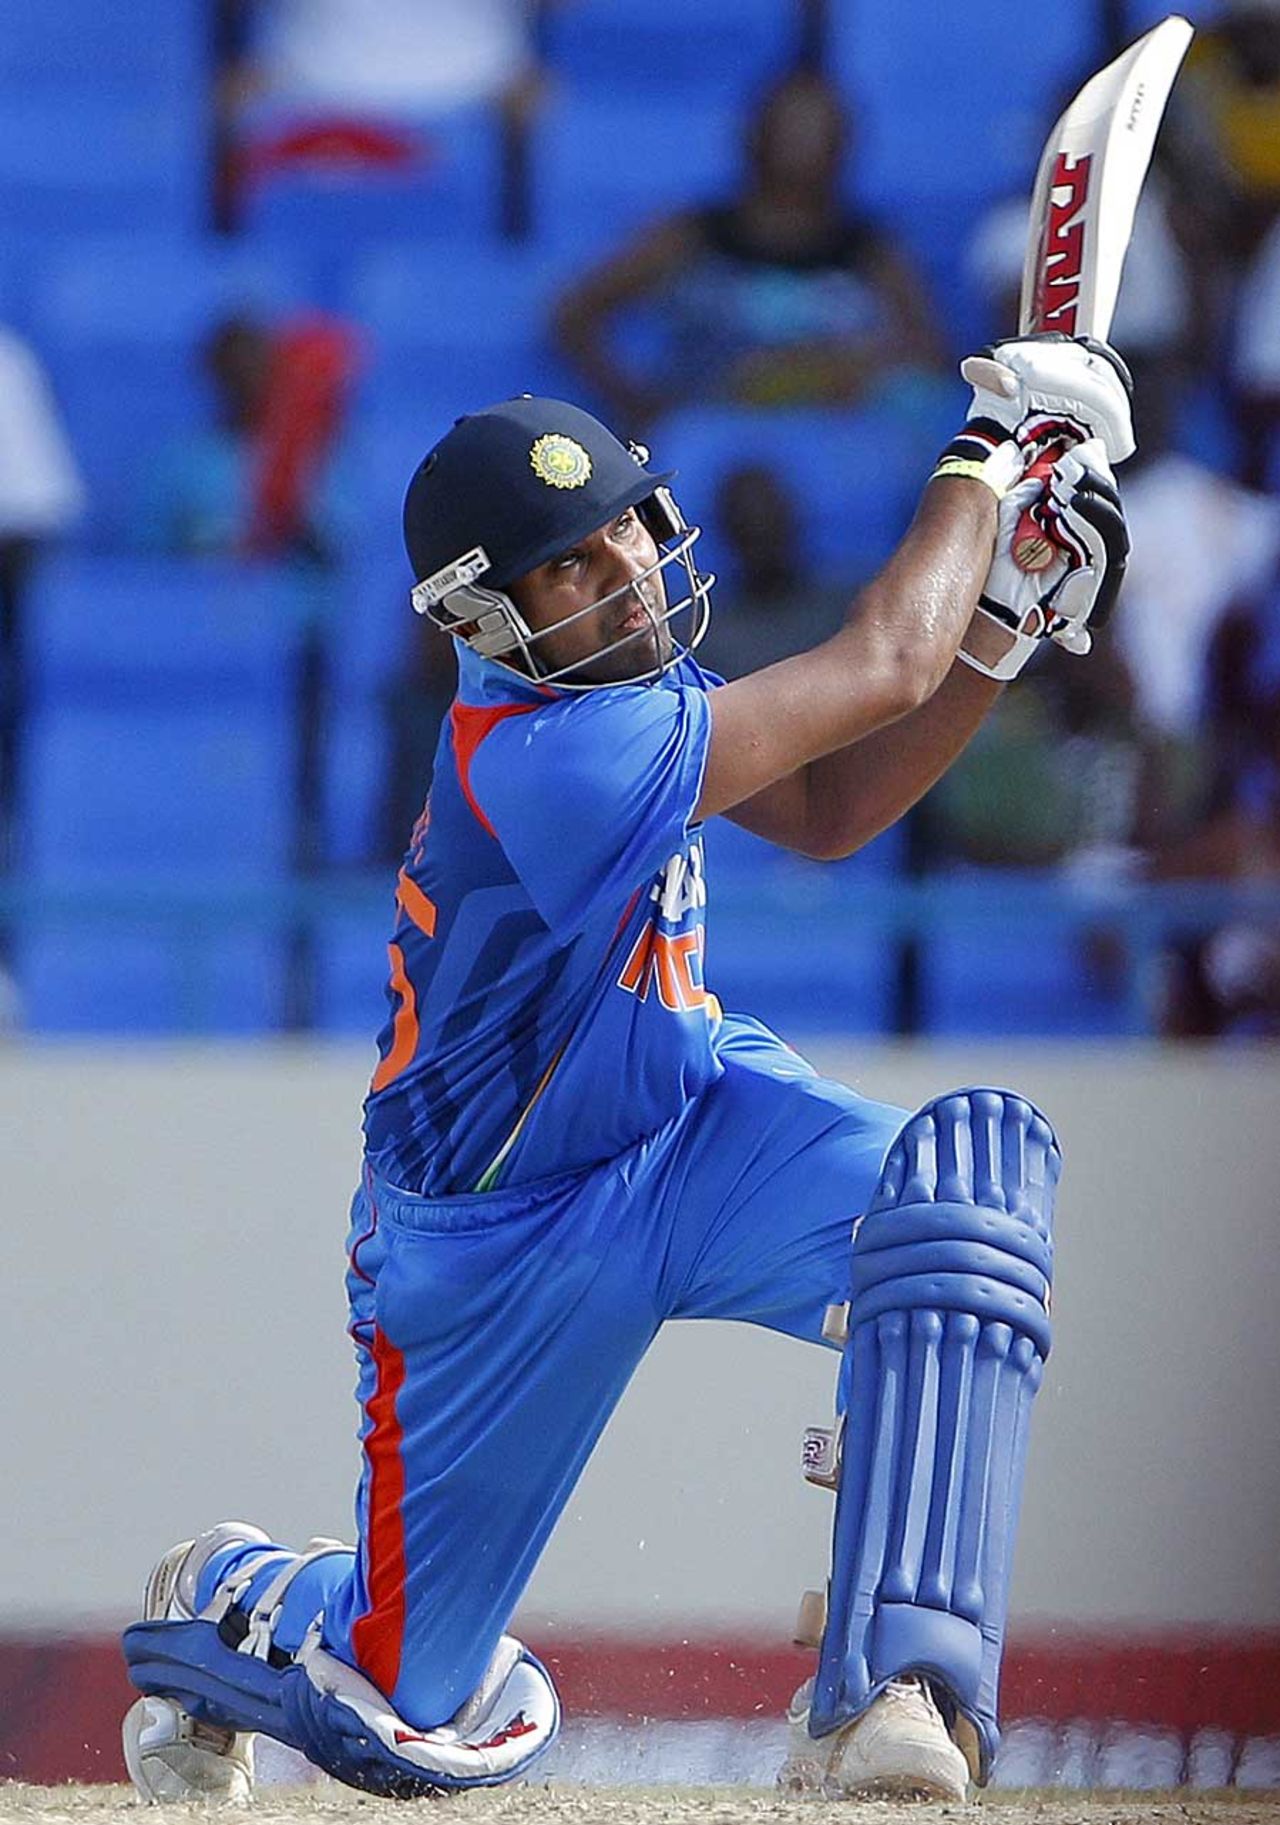 Rohit Sharma fell for the first time in the series, West Indies v India, 4th ODI, Antigua, June 13, 2011